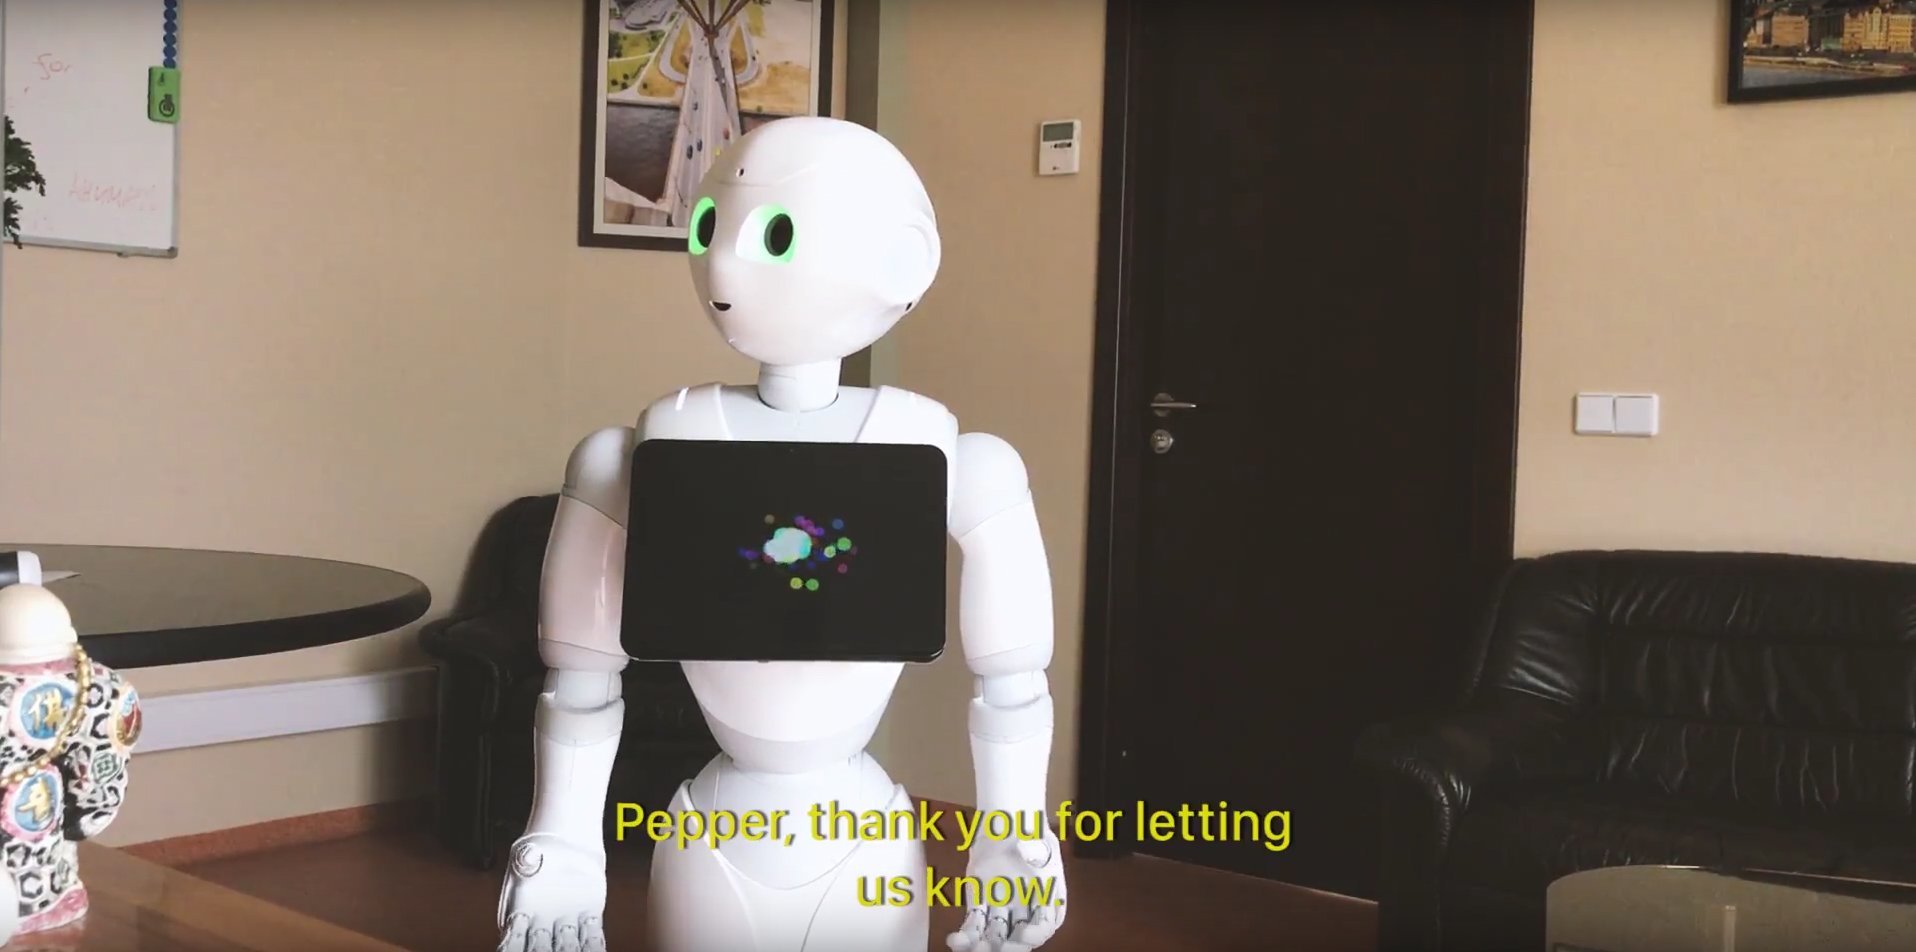 Scene from vlog: Robot Pepper came to the executive to announce the developer’s work